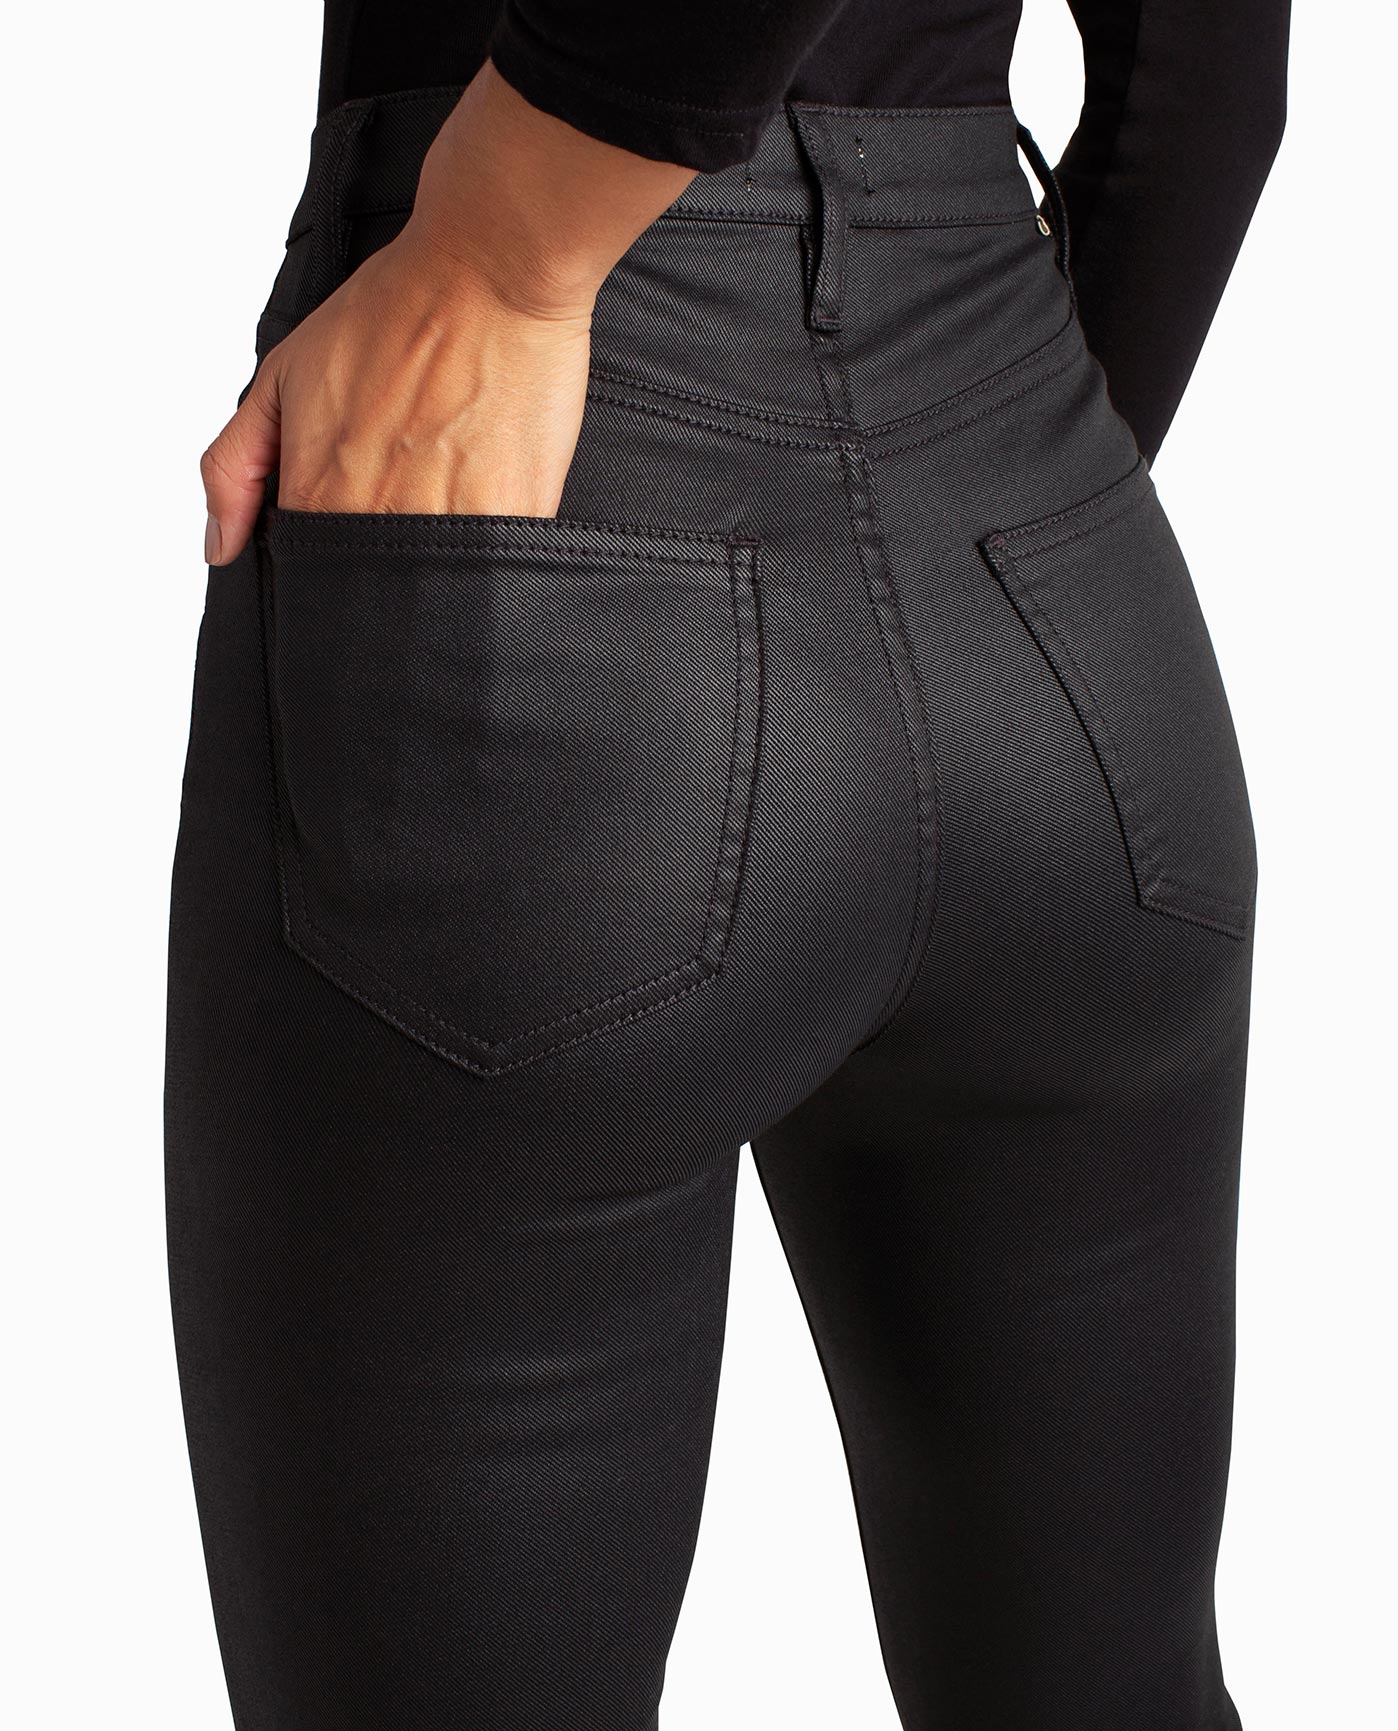 BACK OF GLISTEN HIGH RISE FLARED JEAN WITH HAND IN POCKET | Black